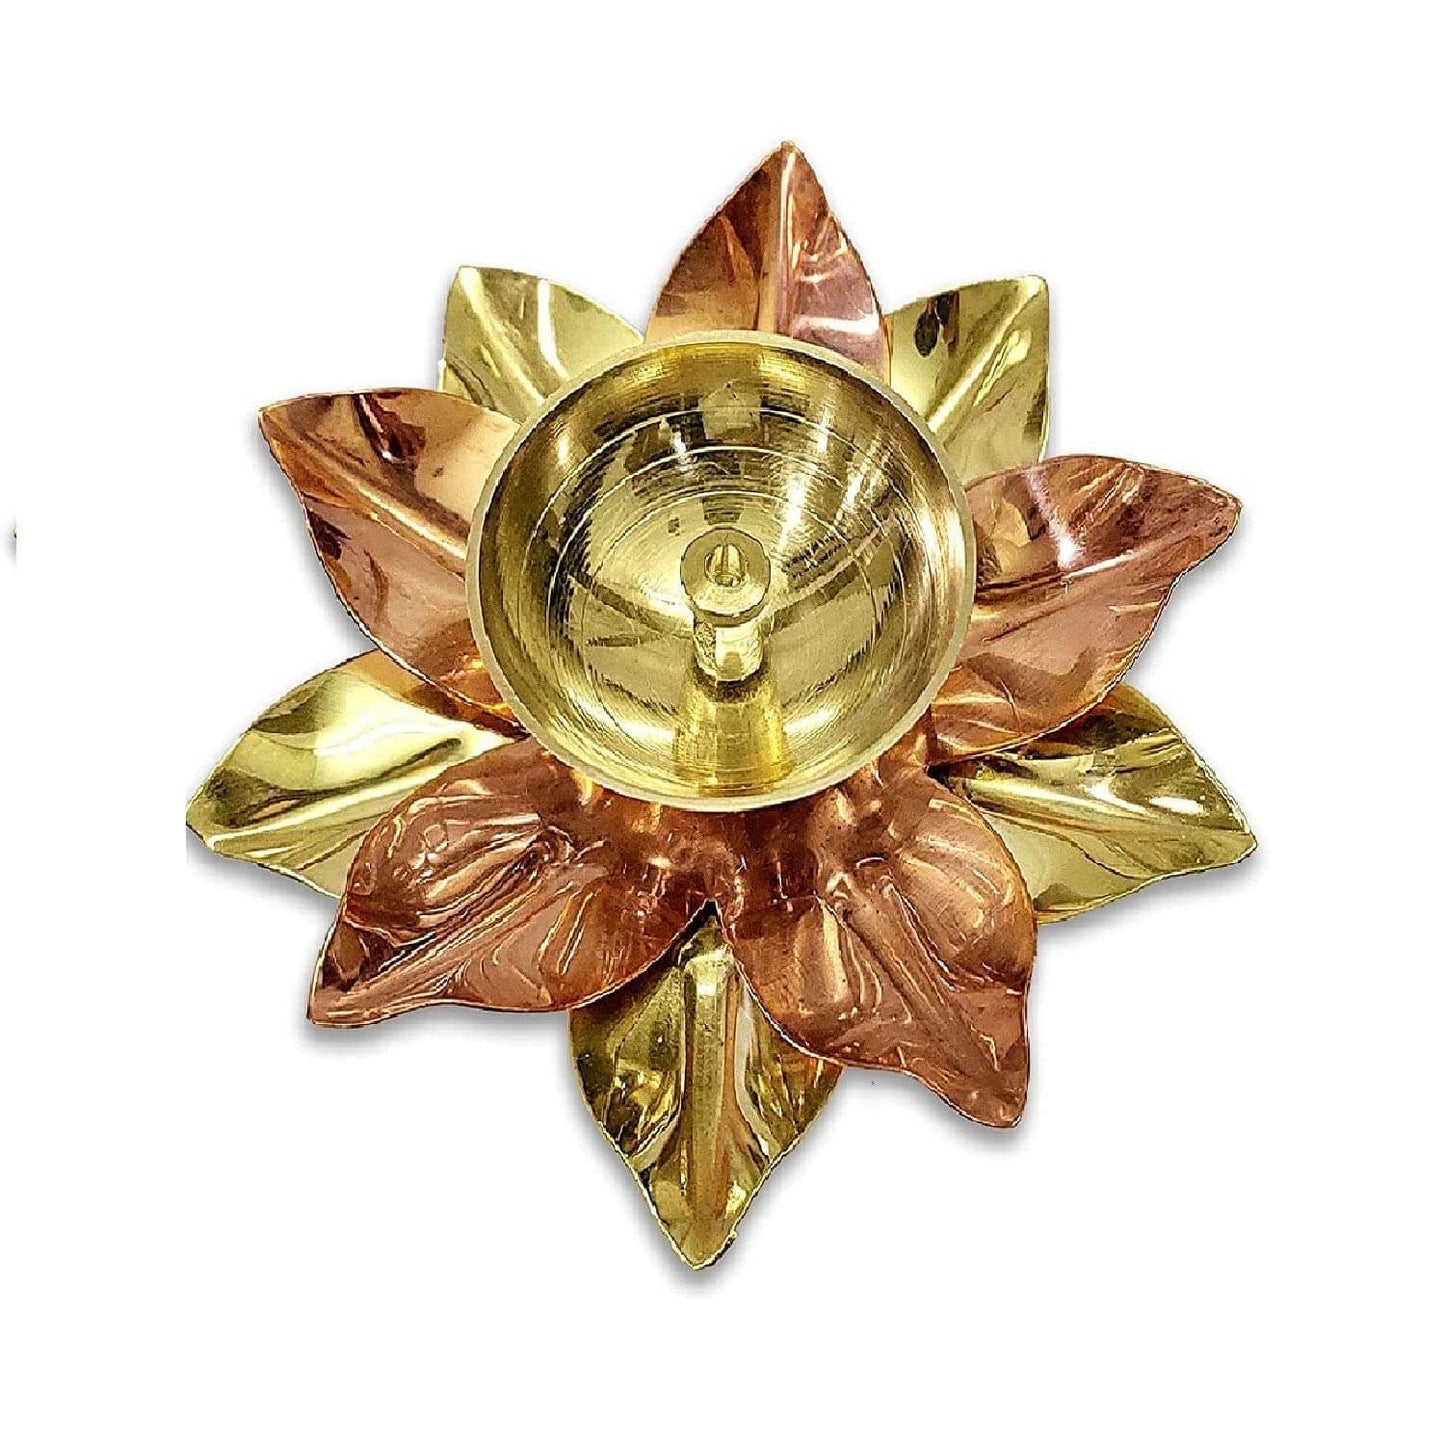 Pack of 6 - Small Brass Copper Lotus Flower Petals Kamal Shape Metal Akand Diya for Pooja, Home Decor and Gifting Mangal Fashions | Indian Home Decor and Craft